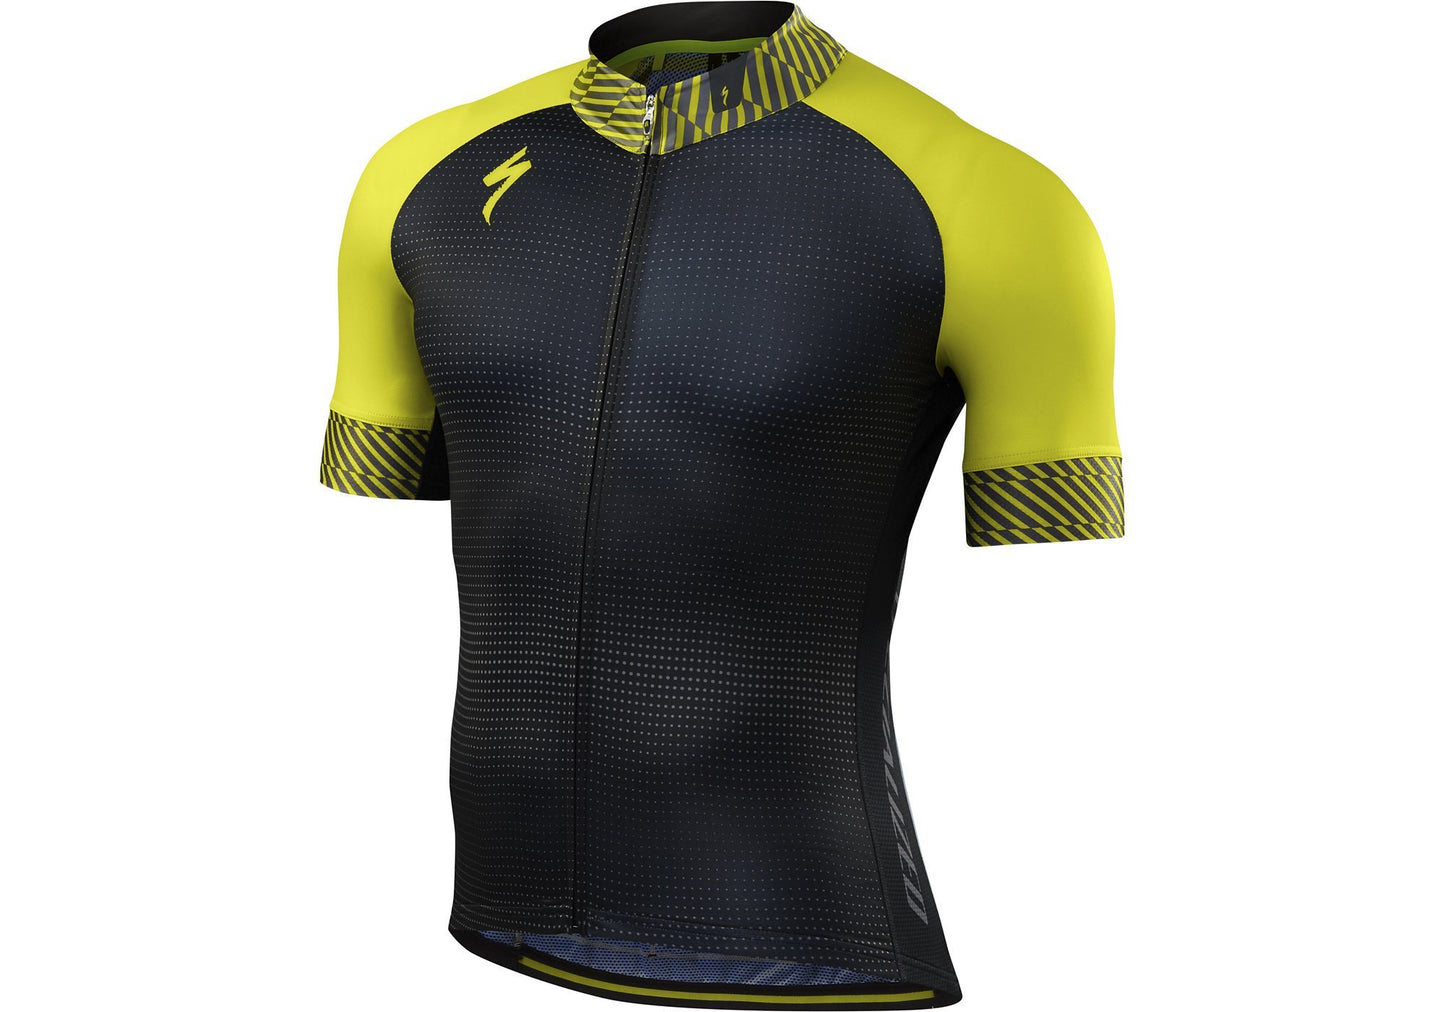 Specialized SL Expert Mens Jersey 2018